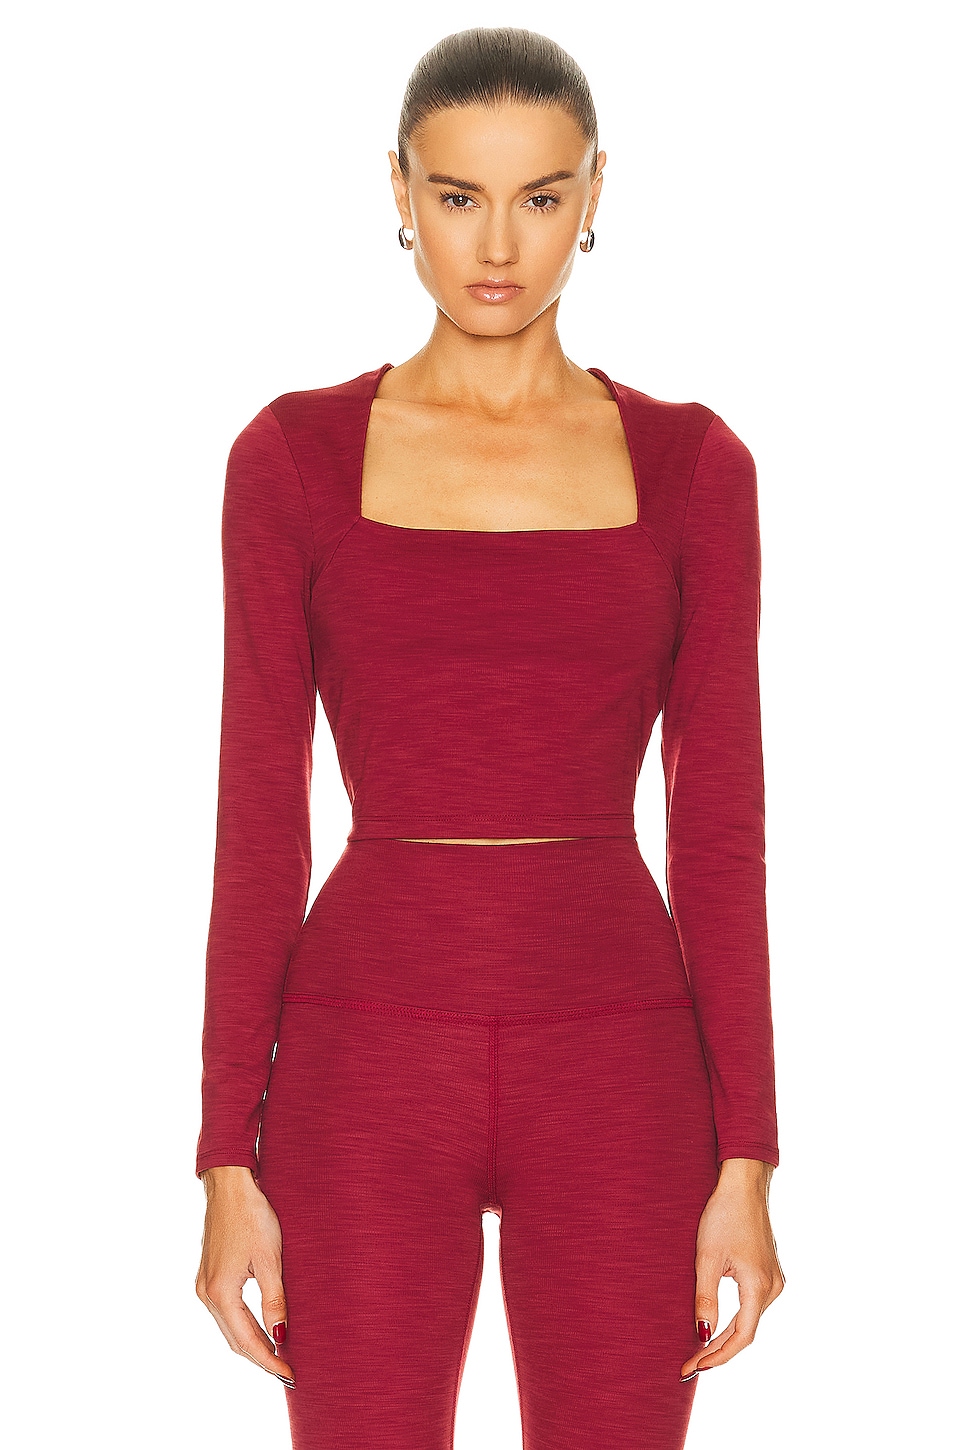 Image 1 of Beyond Yoga Heather Rib Frame Cropped Pullover Top in Rosewood Heather Rib